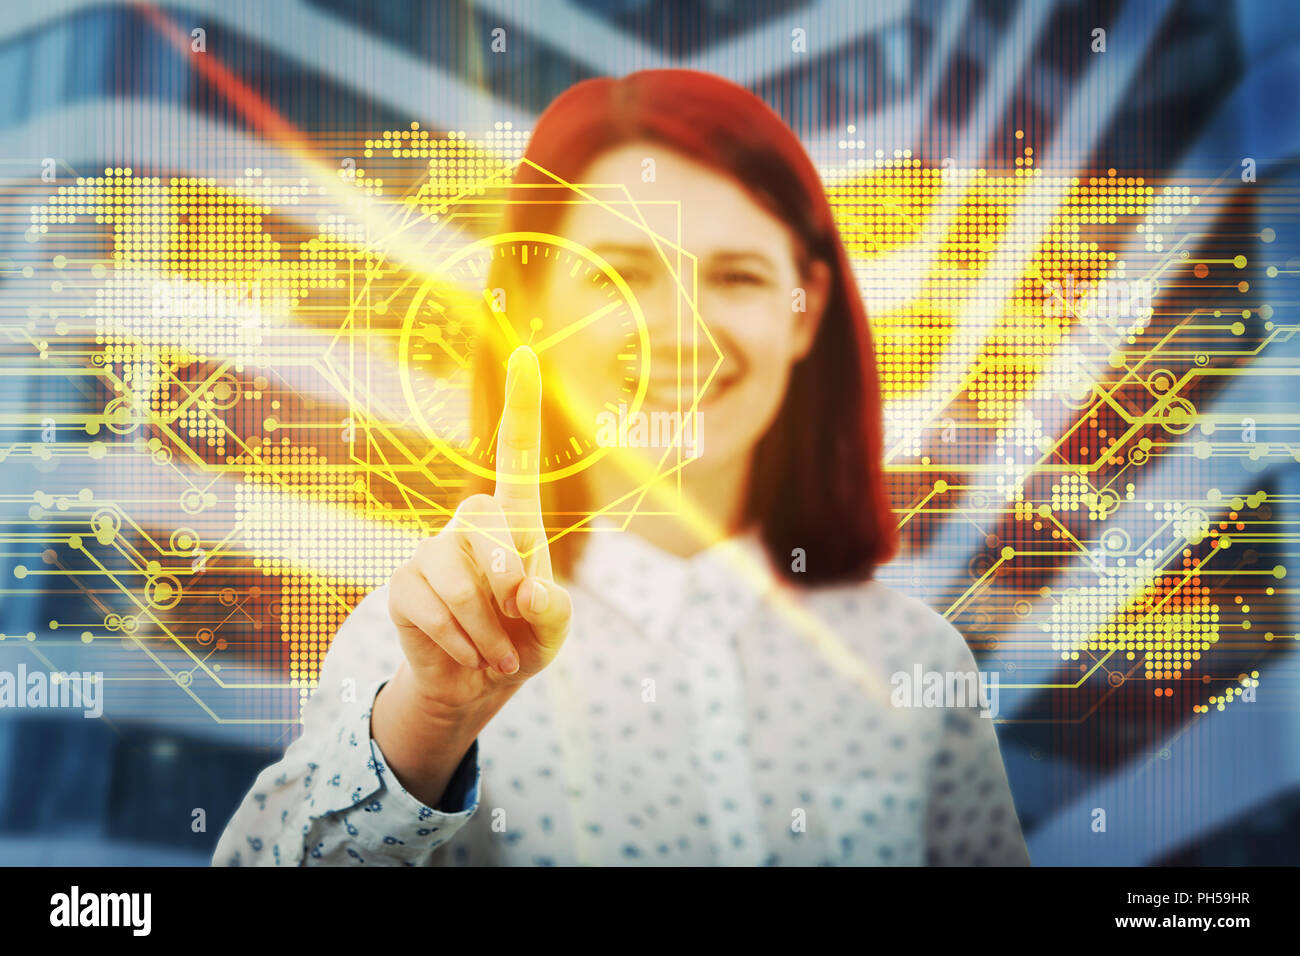 Smiling woman touching digital screen interface. Press on the golden clock icon. Modern technology time planning concept. Virtual business services fo Stock Photo